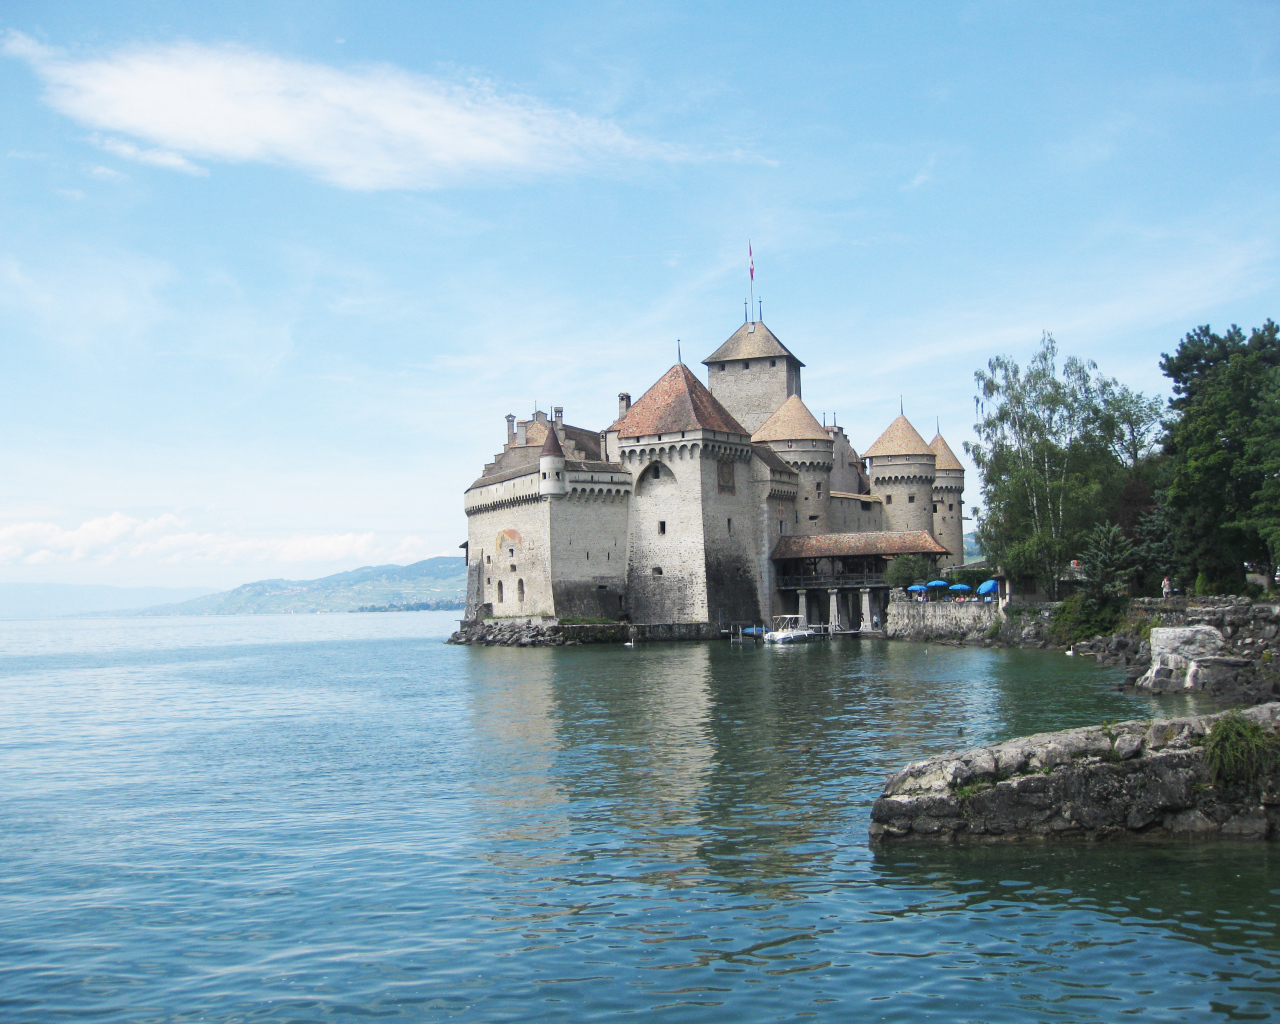 Castle in the resort of Evian, France